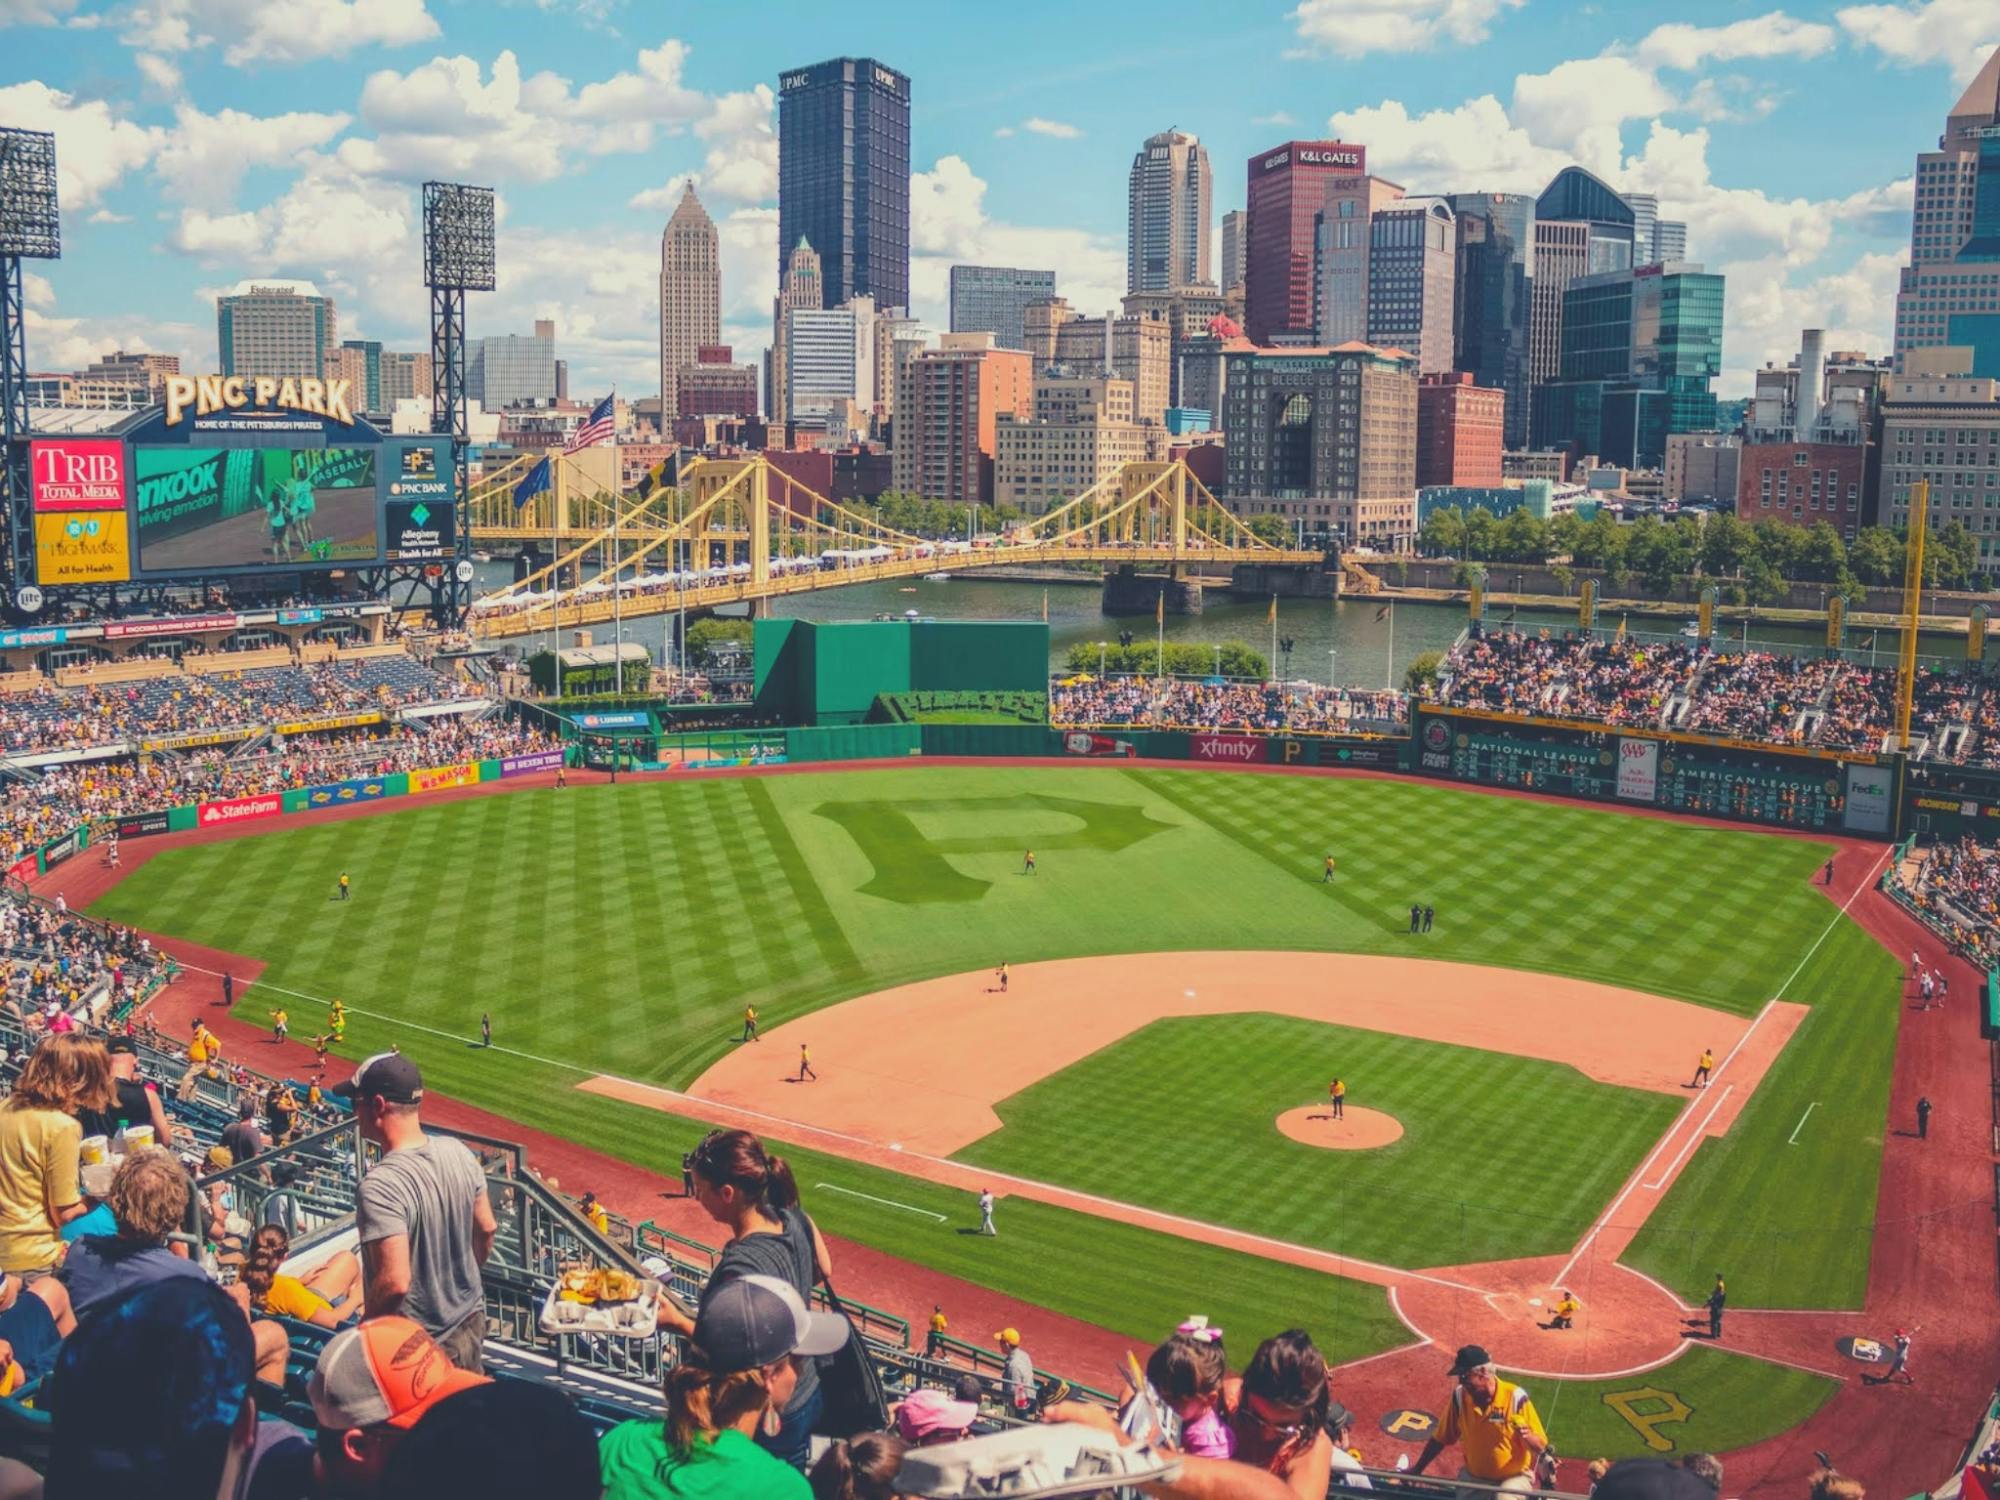 Pittsburgh Pirates Baseball Game Tickets at PNC Park